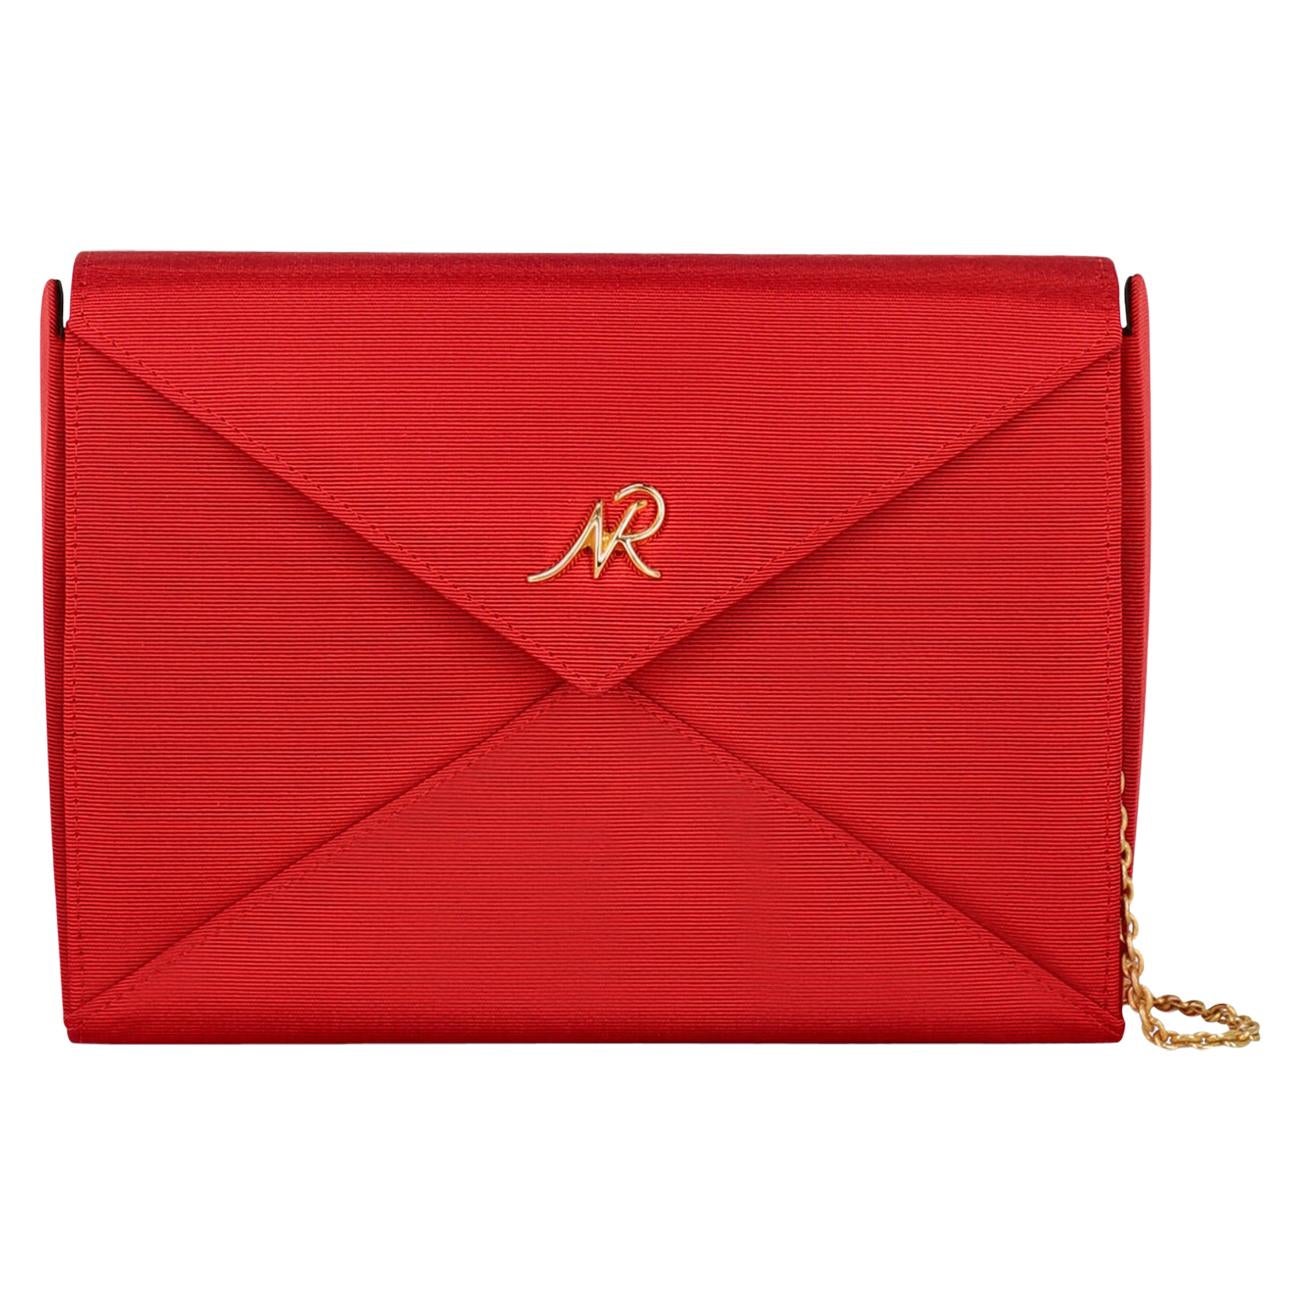 Nina Ricci  Women   Shoulder bags   Red Fabric  For Sale